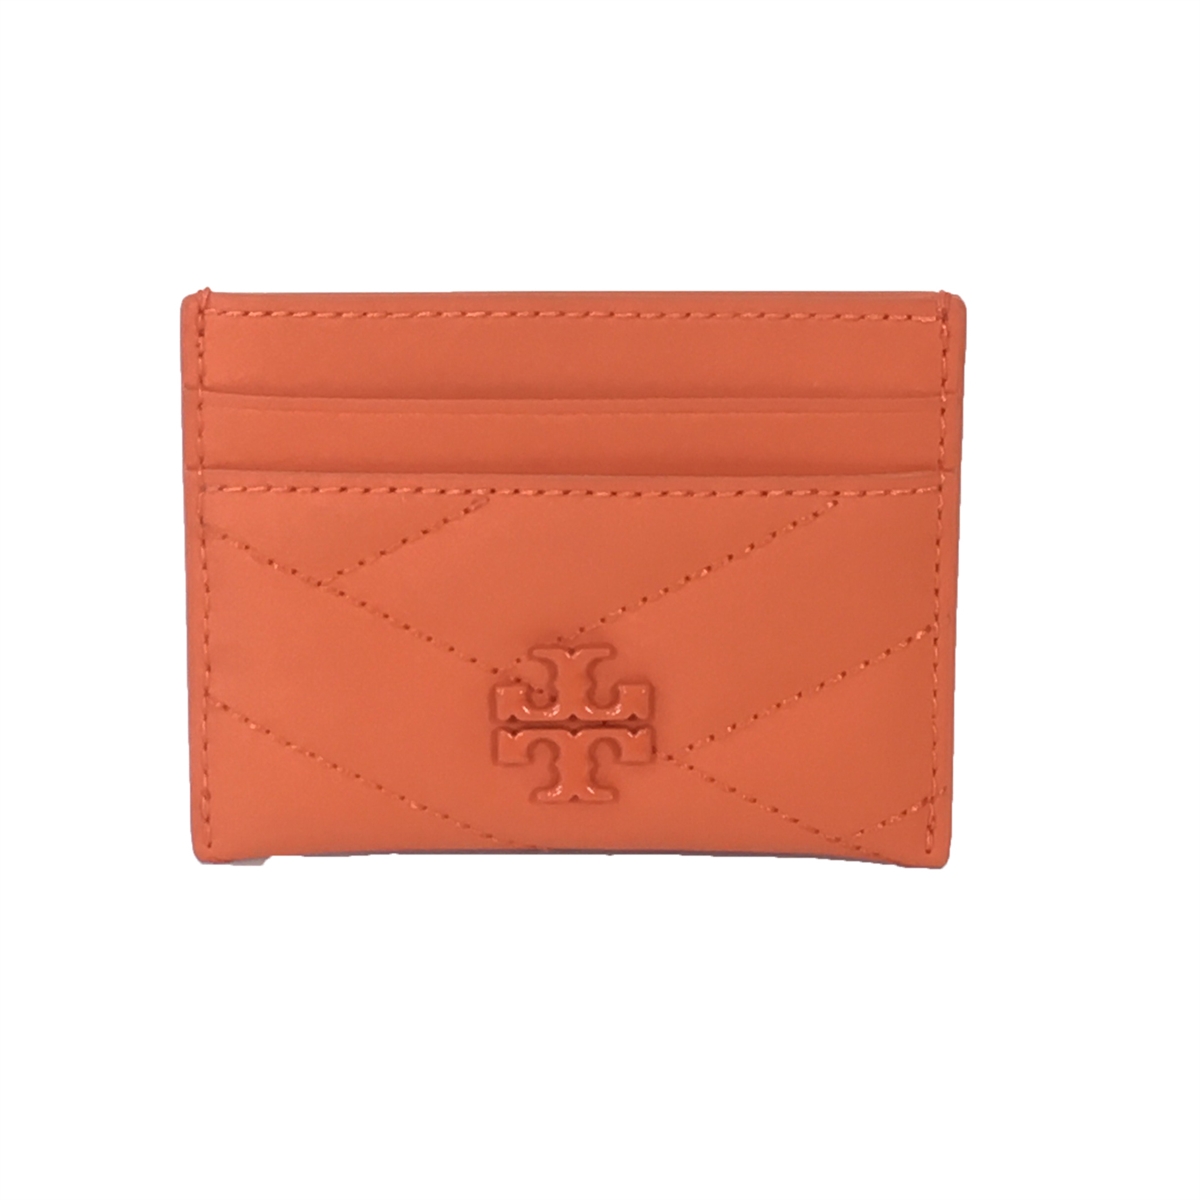 Tory Burch Kira Chevron Quilted Card Case - ShopStyle